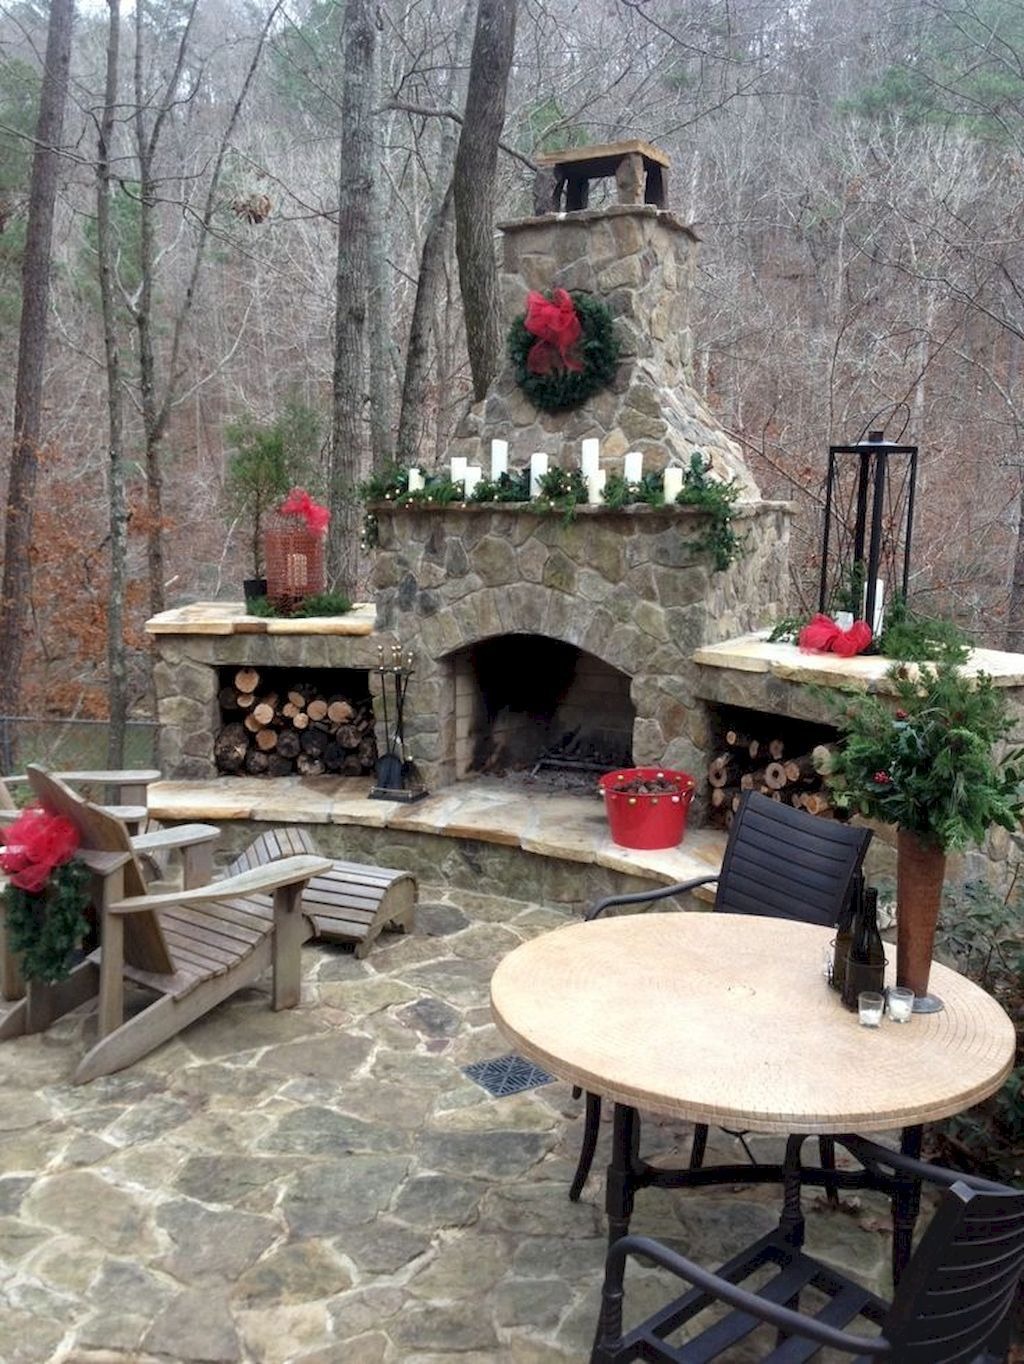 Natural Stone Fireplace in the Backyard